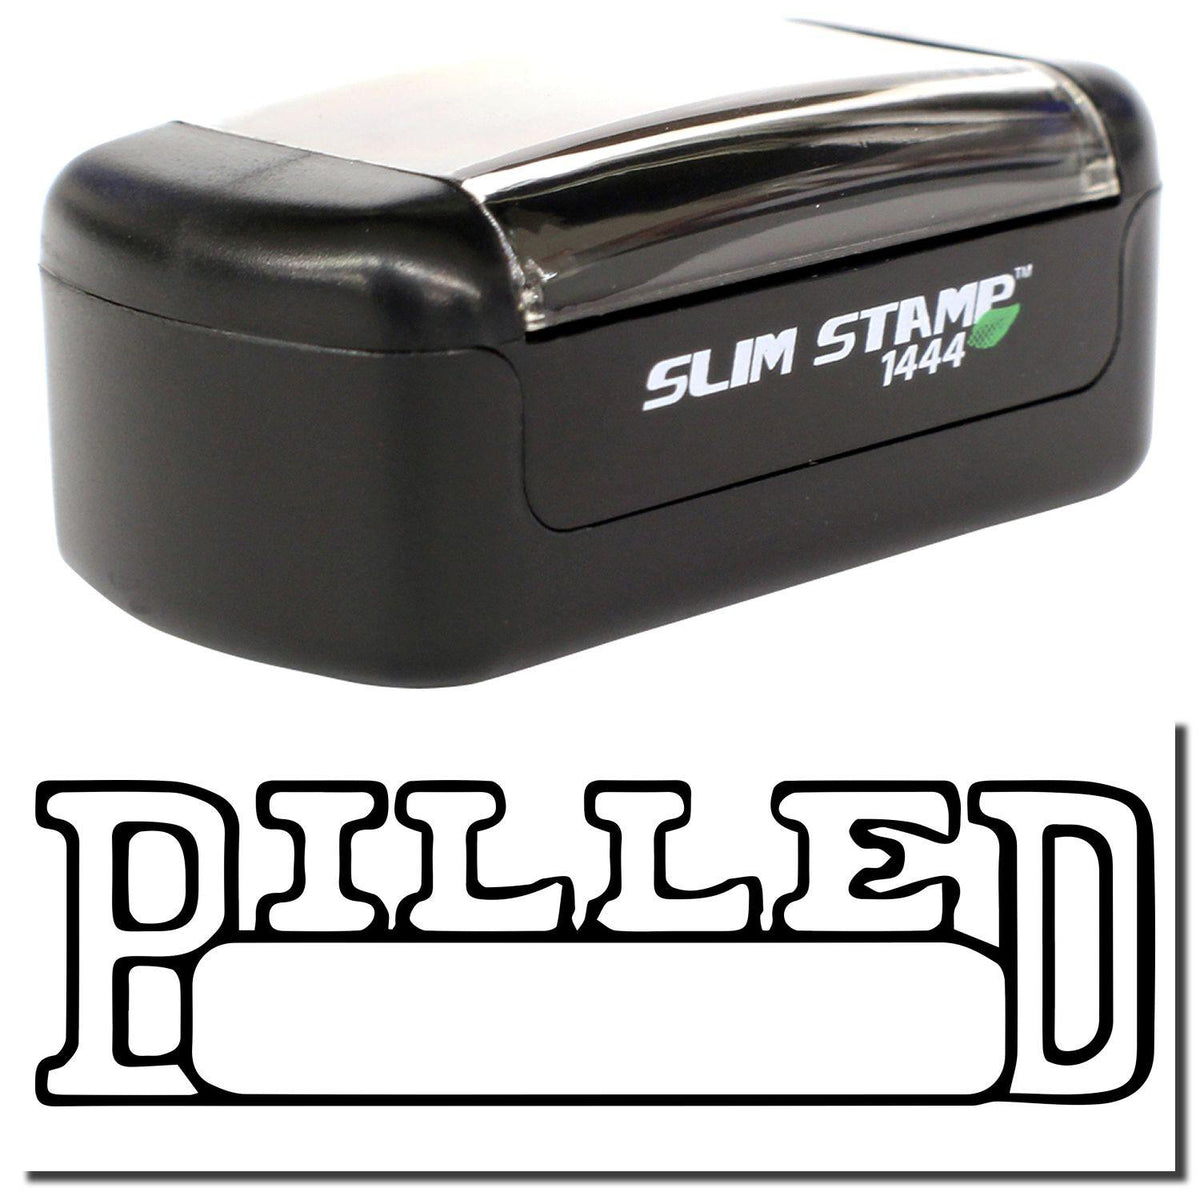 A stock office pre-inked stamp with a stamped image showing how the text &quot;BILLED&quot; in an outline font with a date box is displayed after stamping.